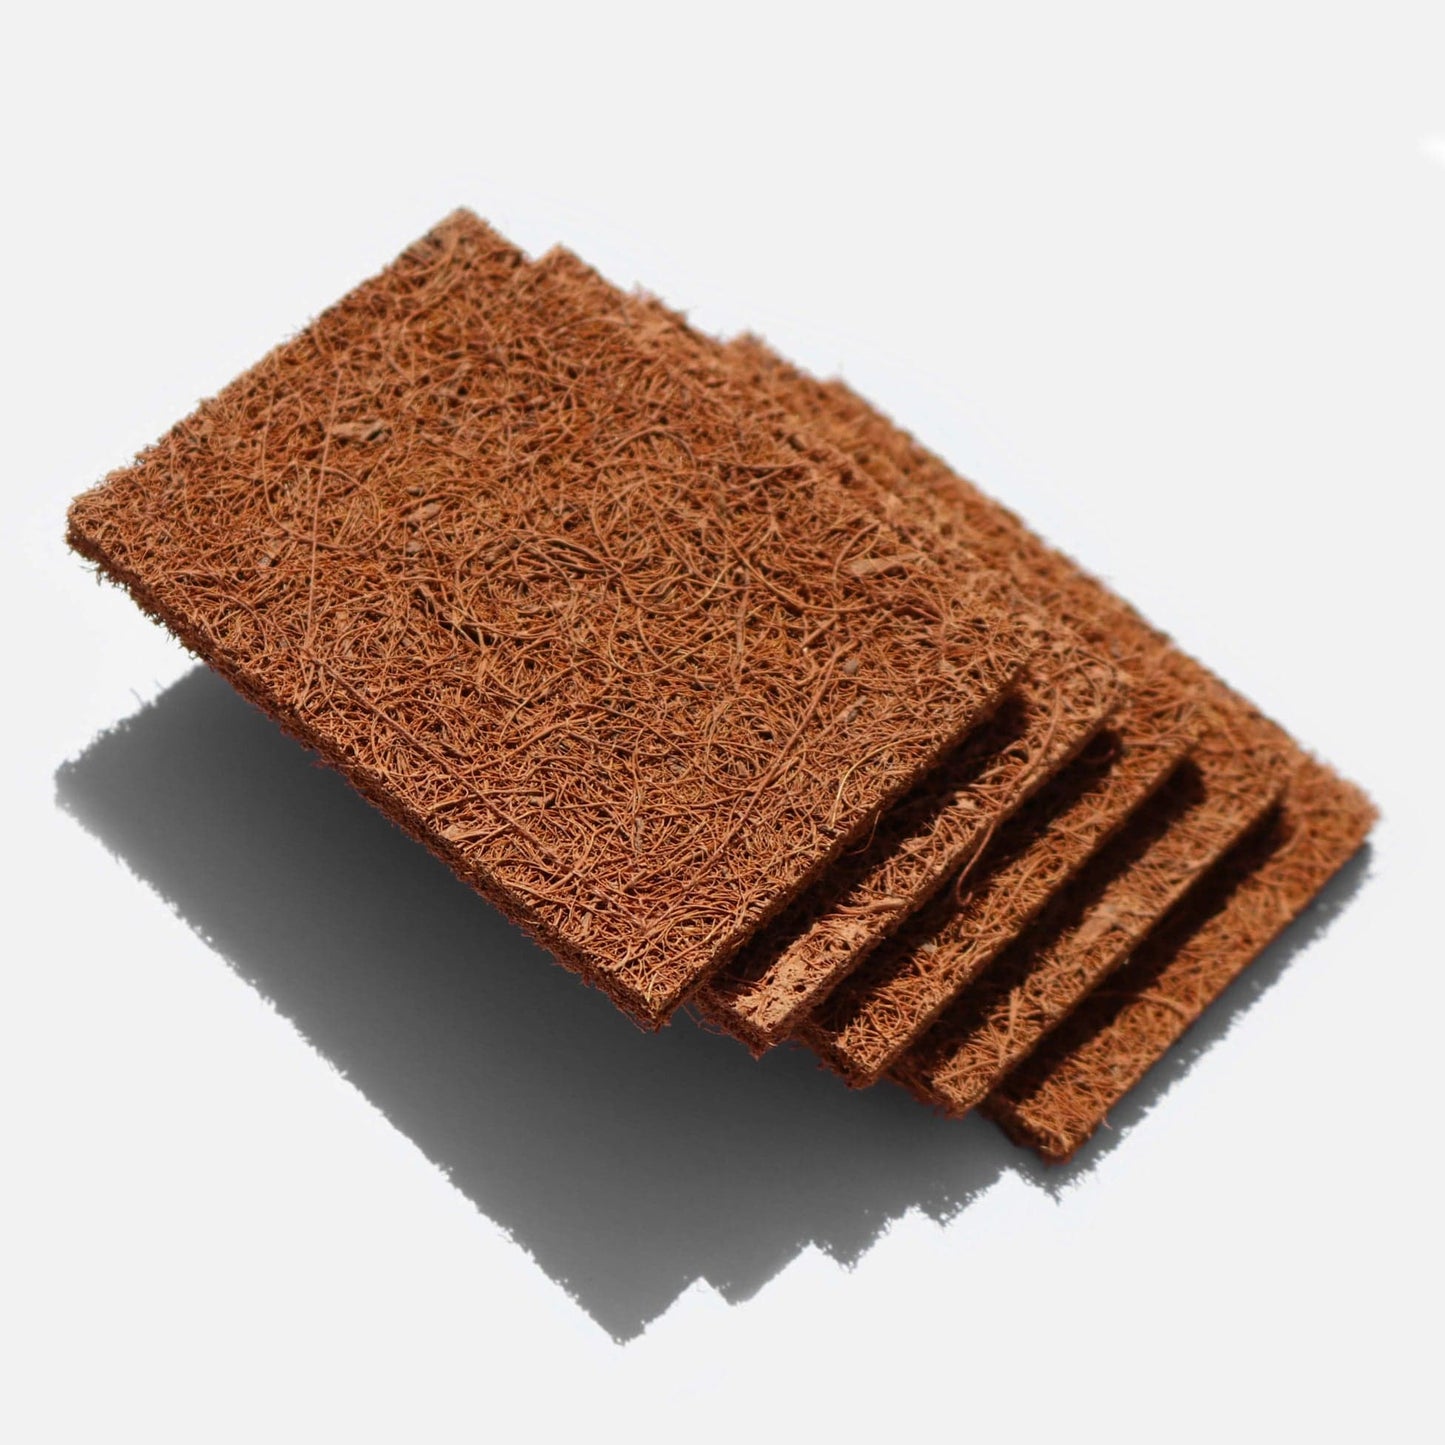 Biodegradable Coconut Kitchen Scourers - Pack of 5 - www.thecotswoldecocompany.co.uk